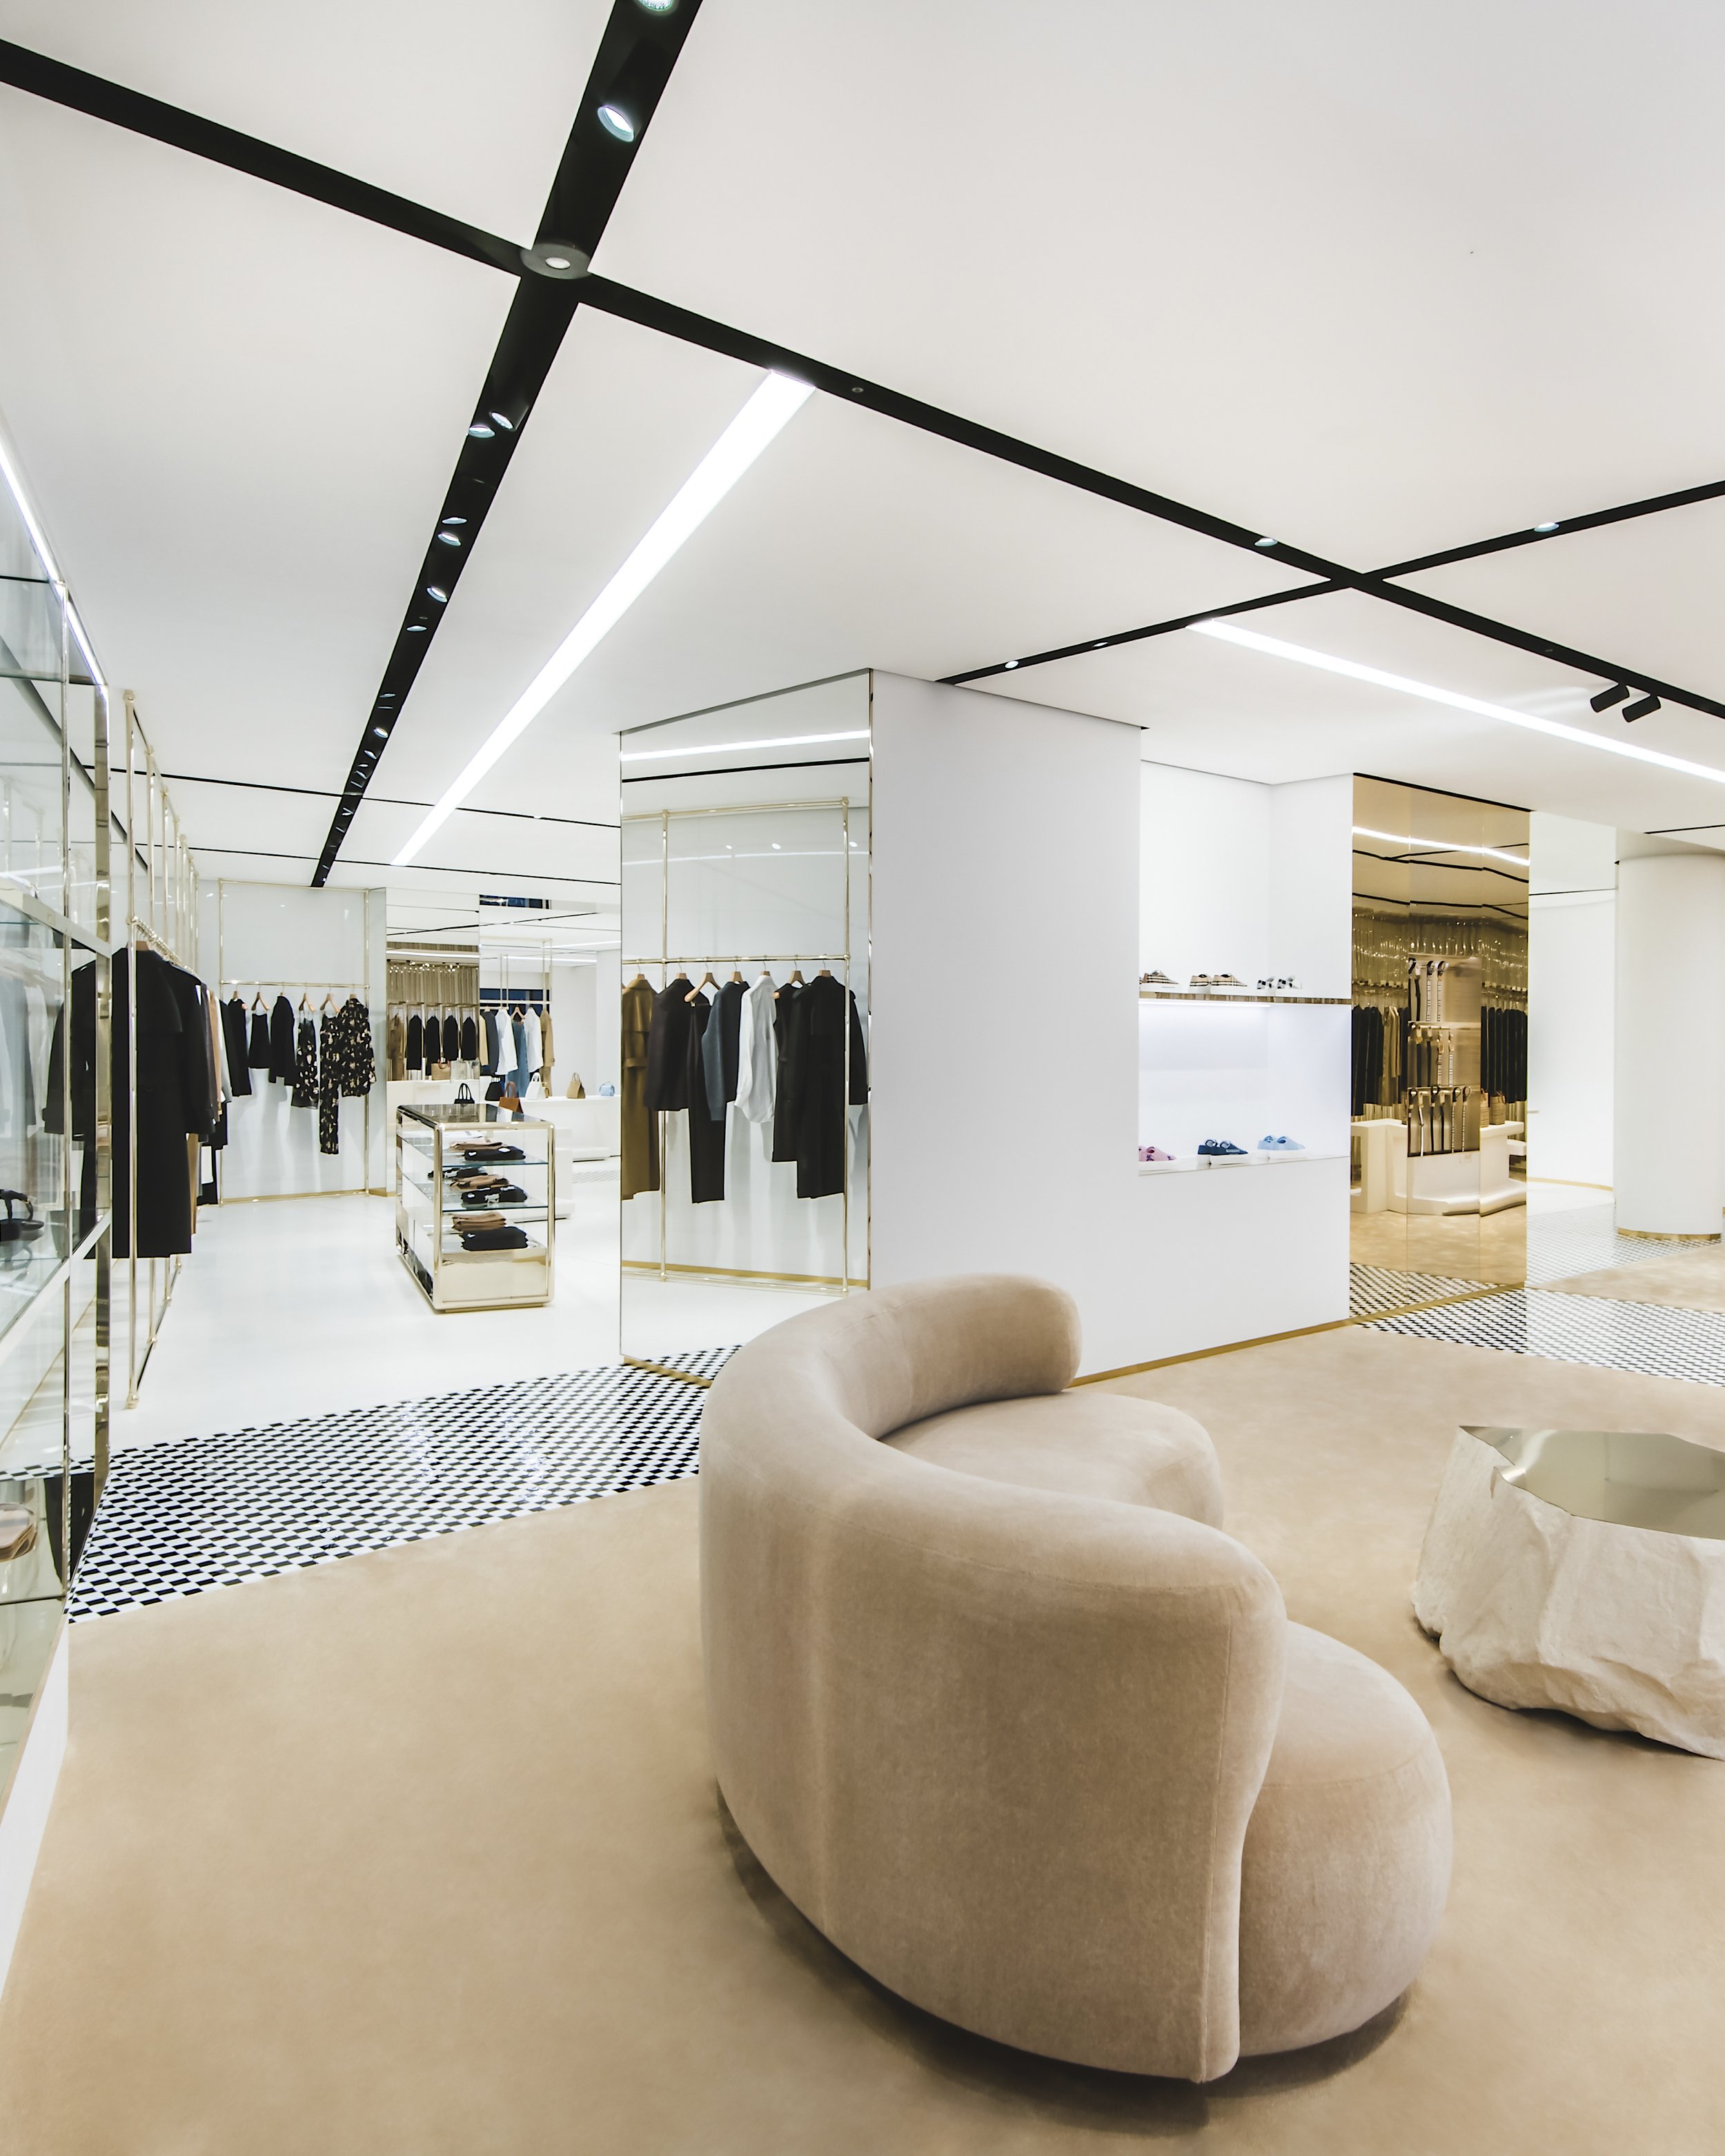 Discover Dior's New Iconic Address on Sloane Street